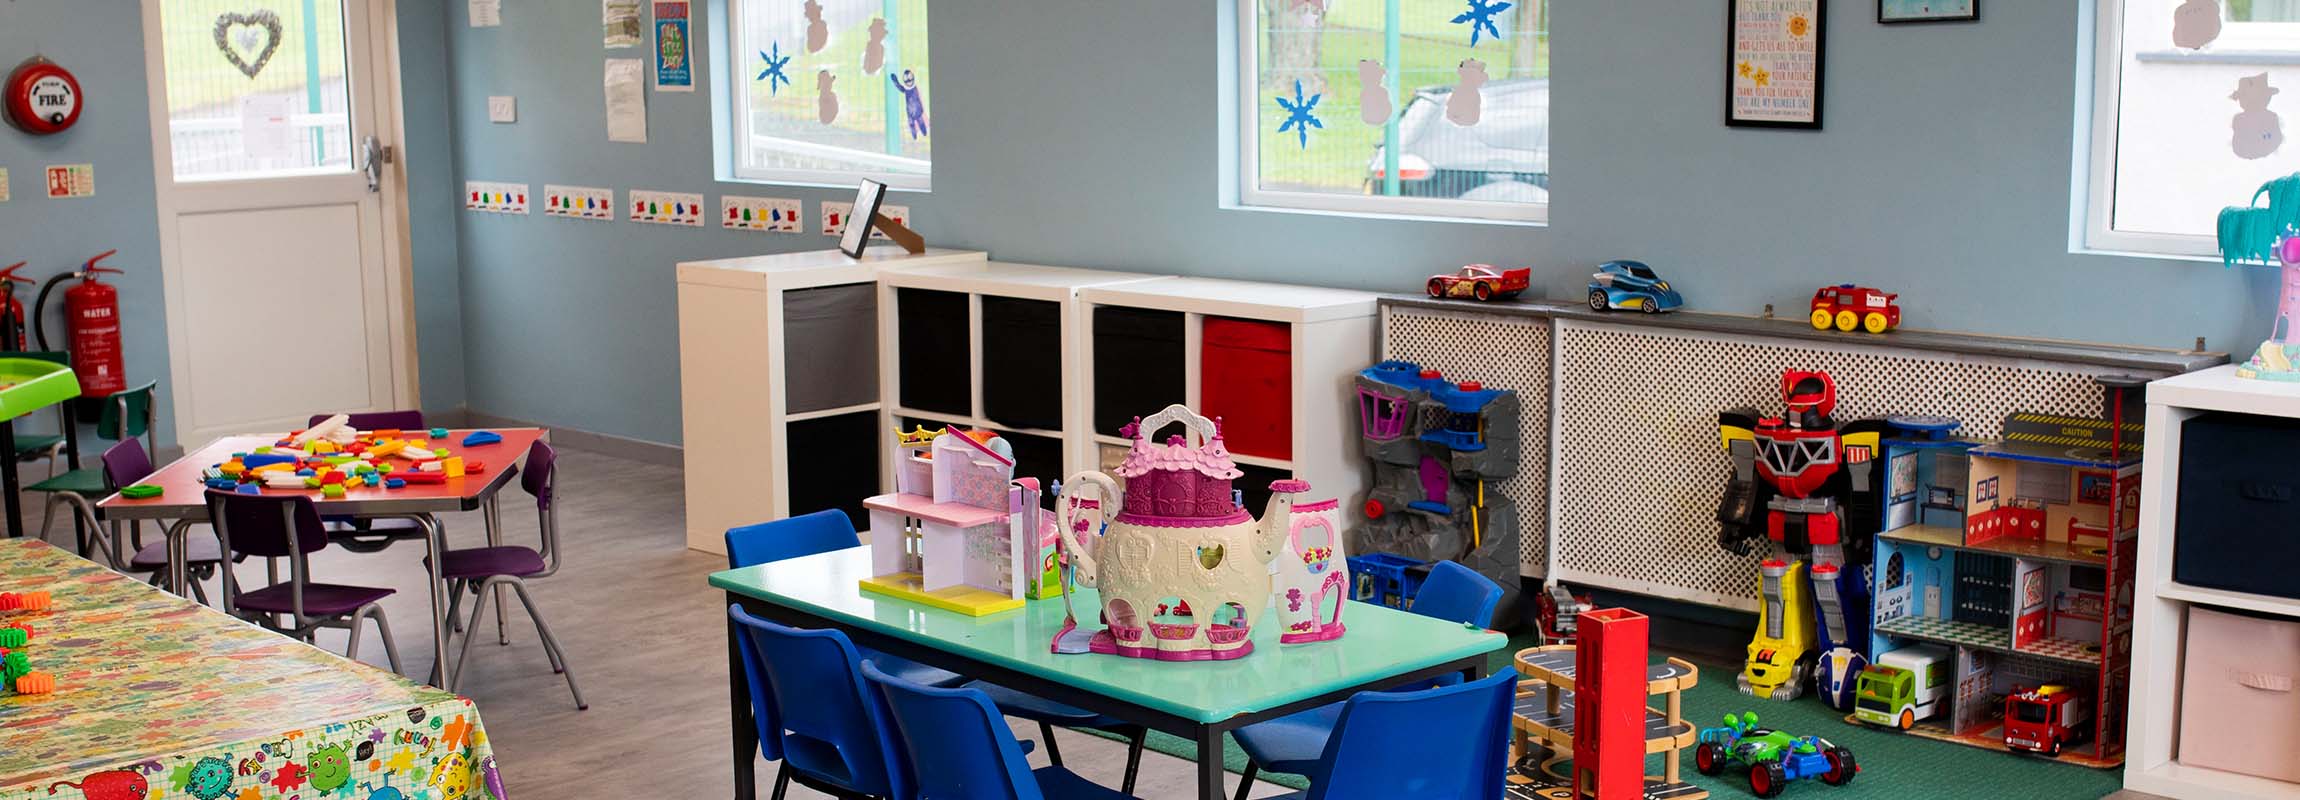 Chldrens indoor play area at our Lisburn based Day Nursery